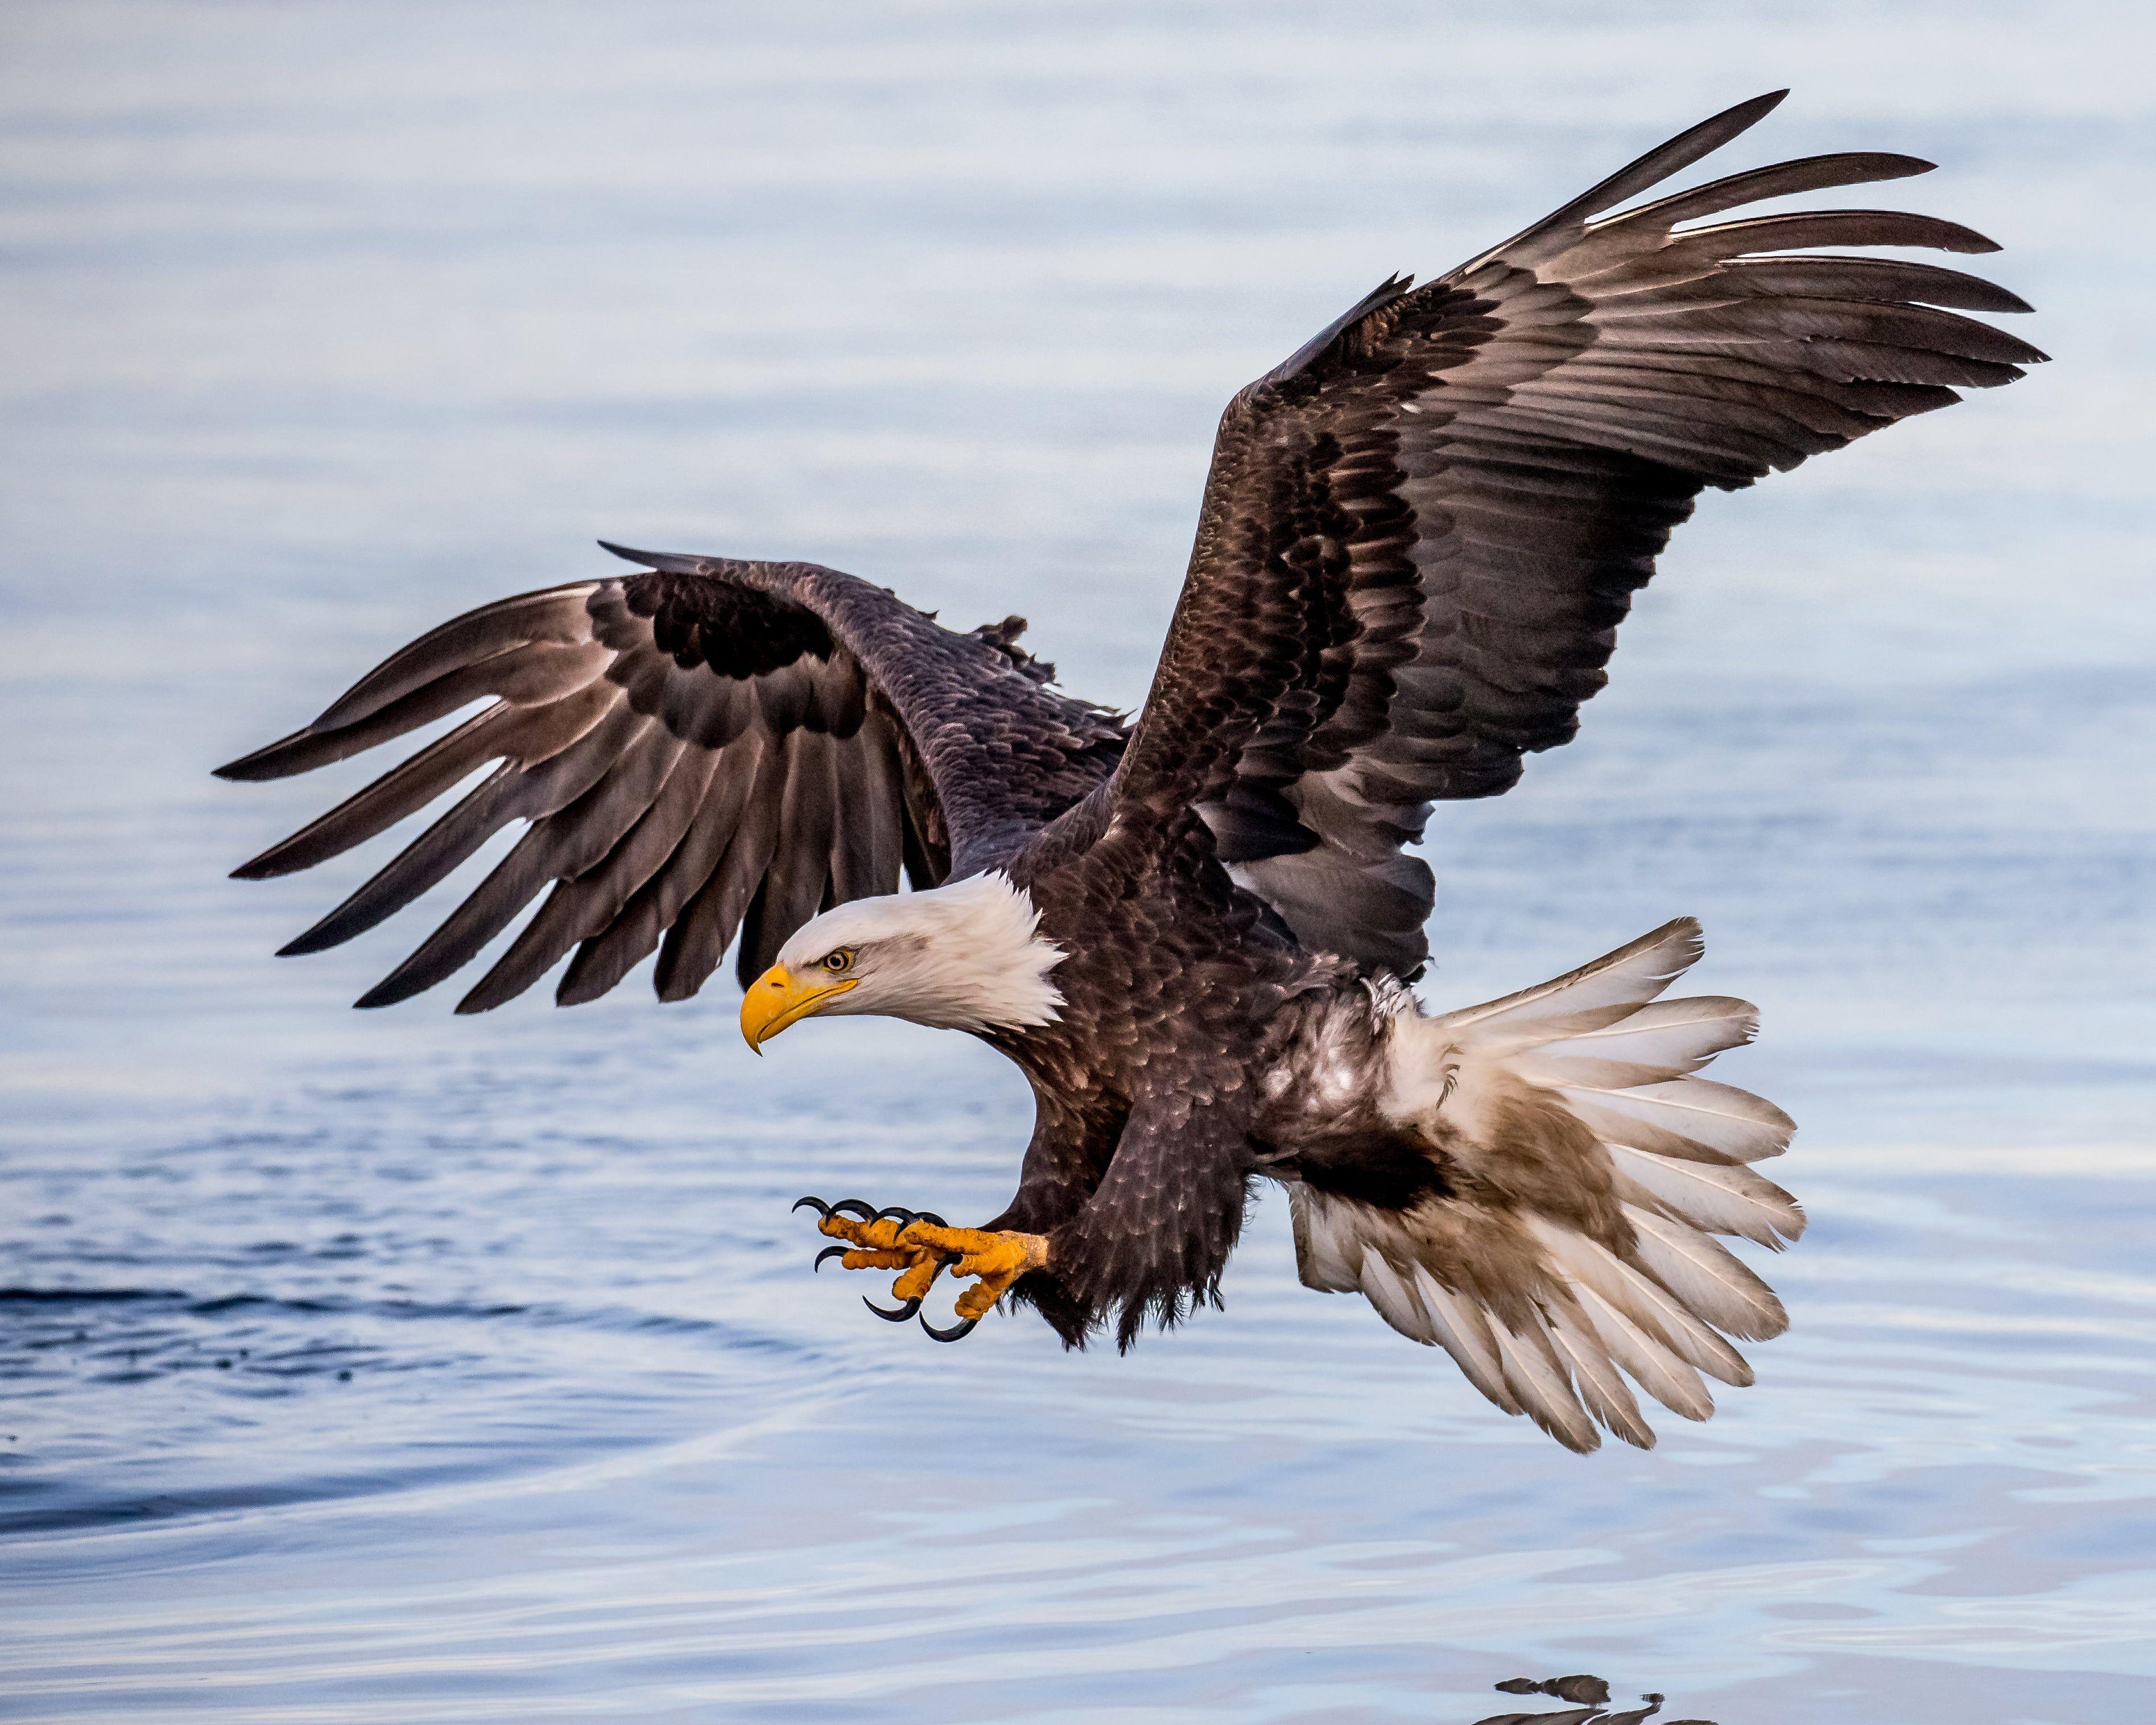 Eagle Flying Hd Wallpapers Top Free Eagle Flying Hd Backgrounds